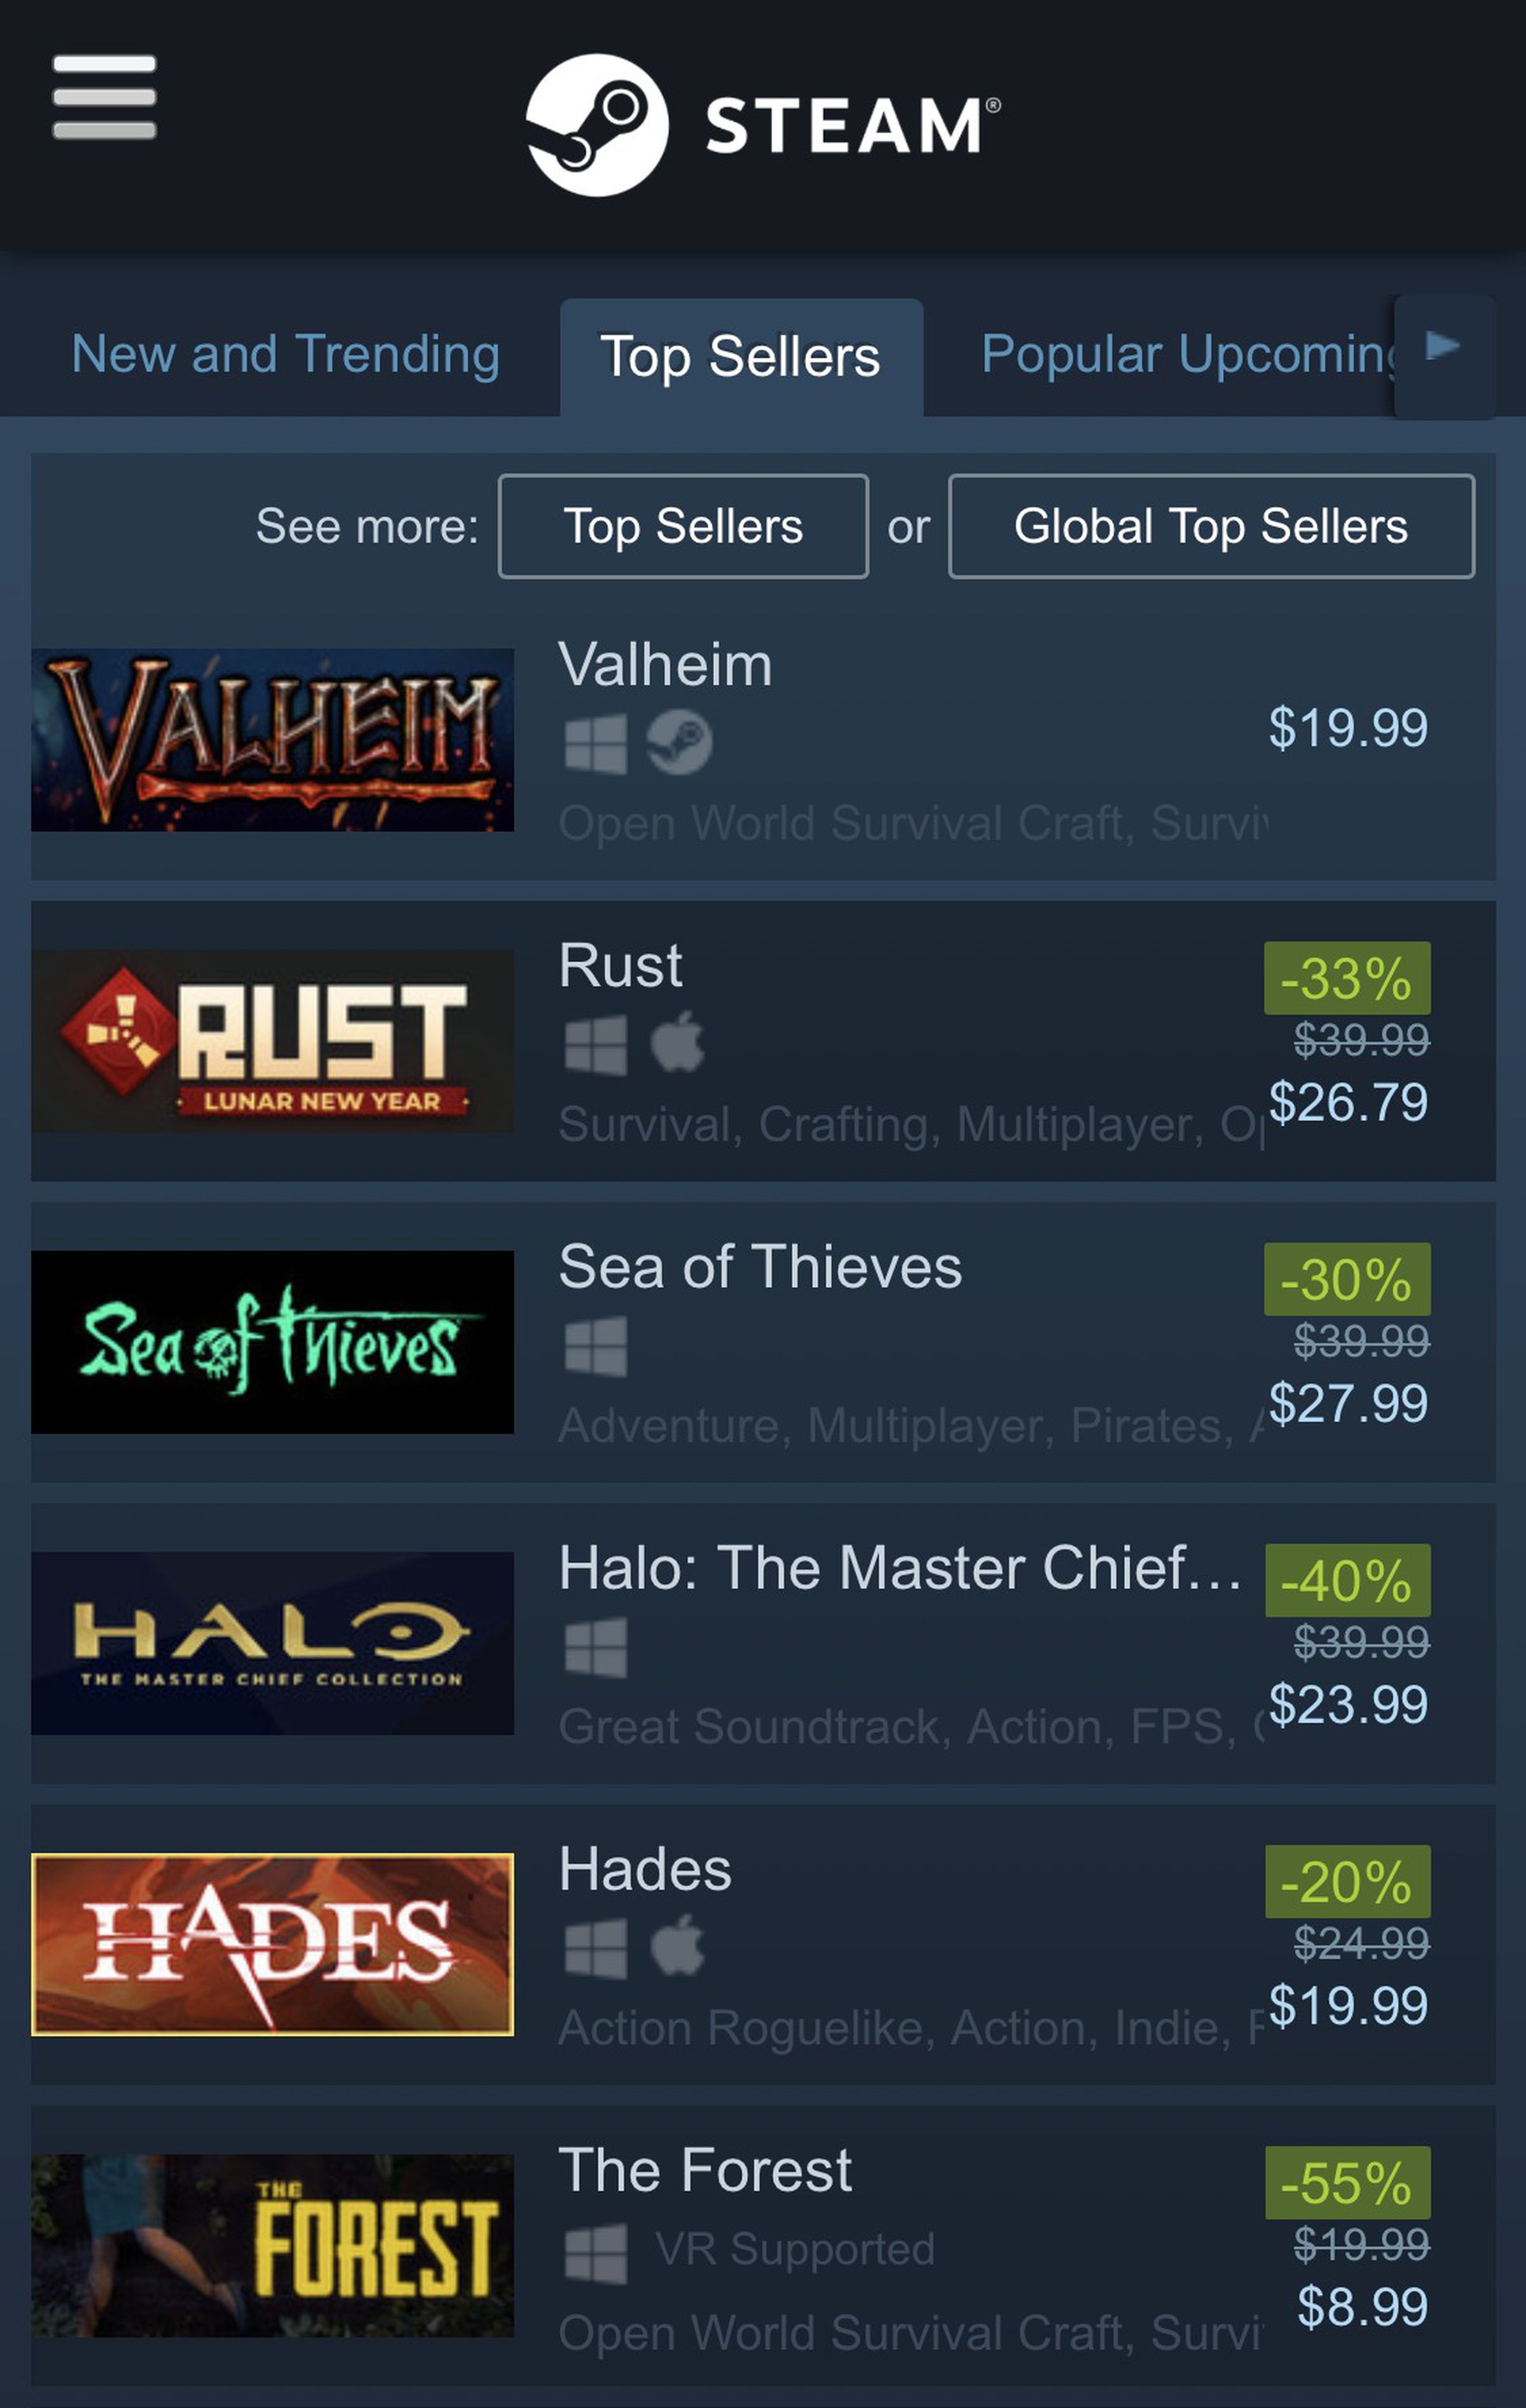 Screenshot taken February 15th, the last day of the Steam sale.